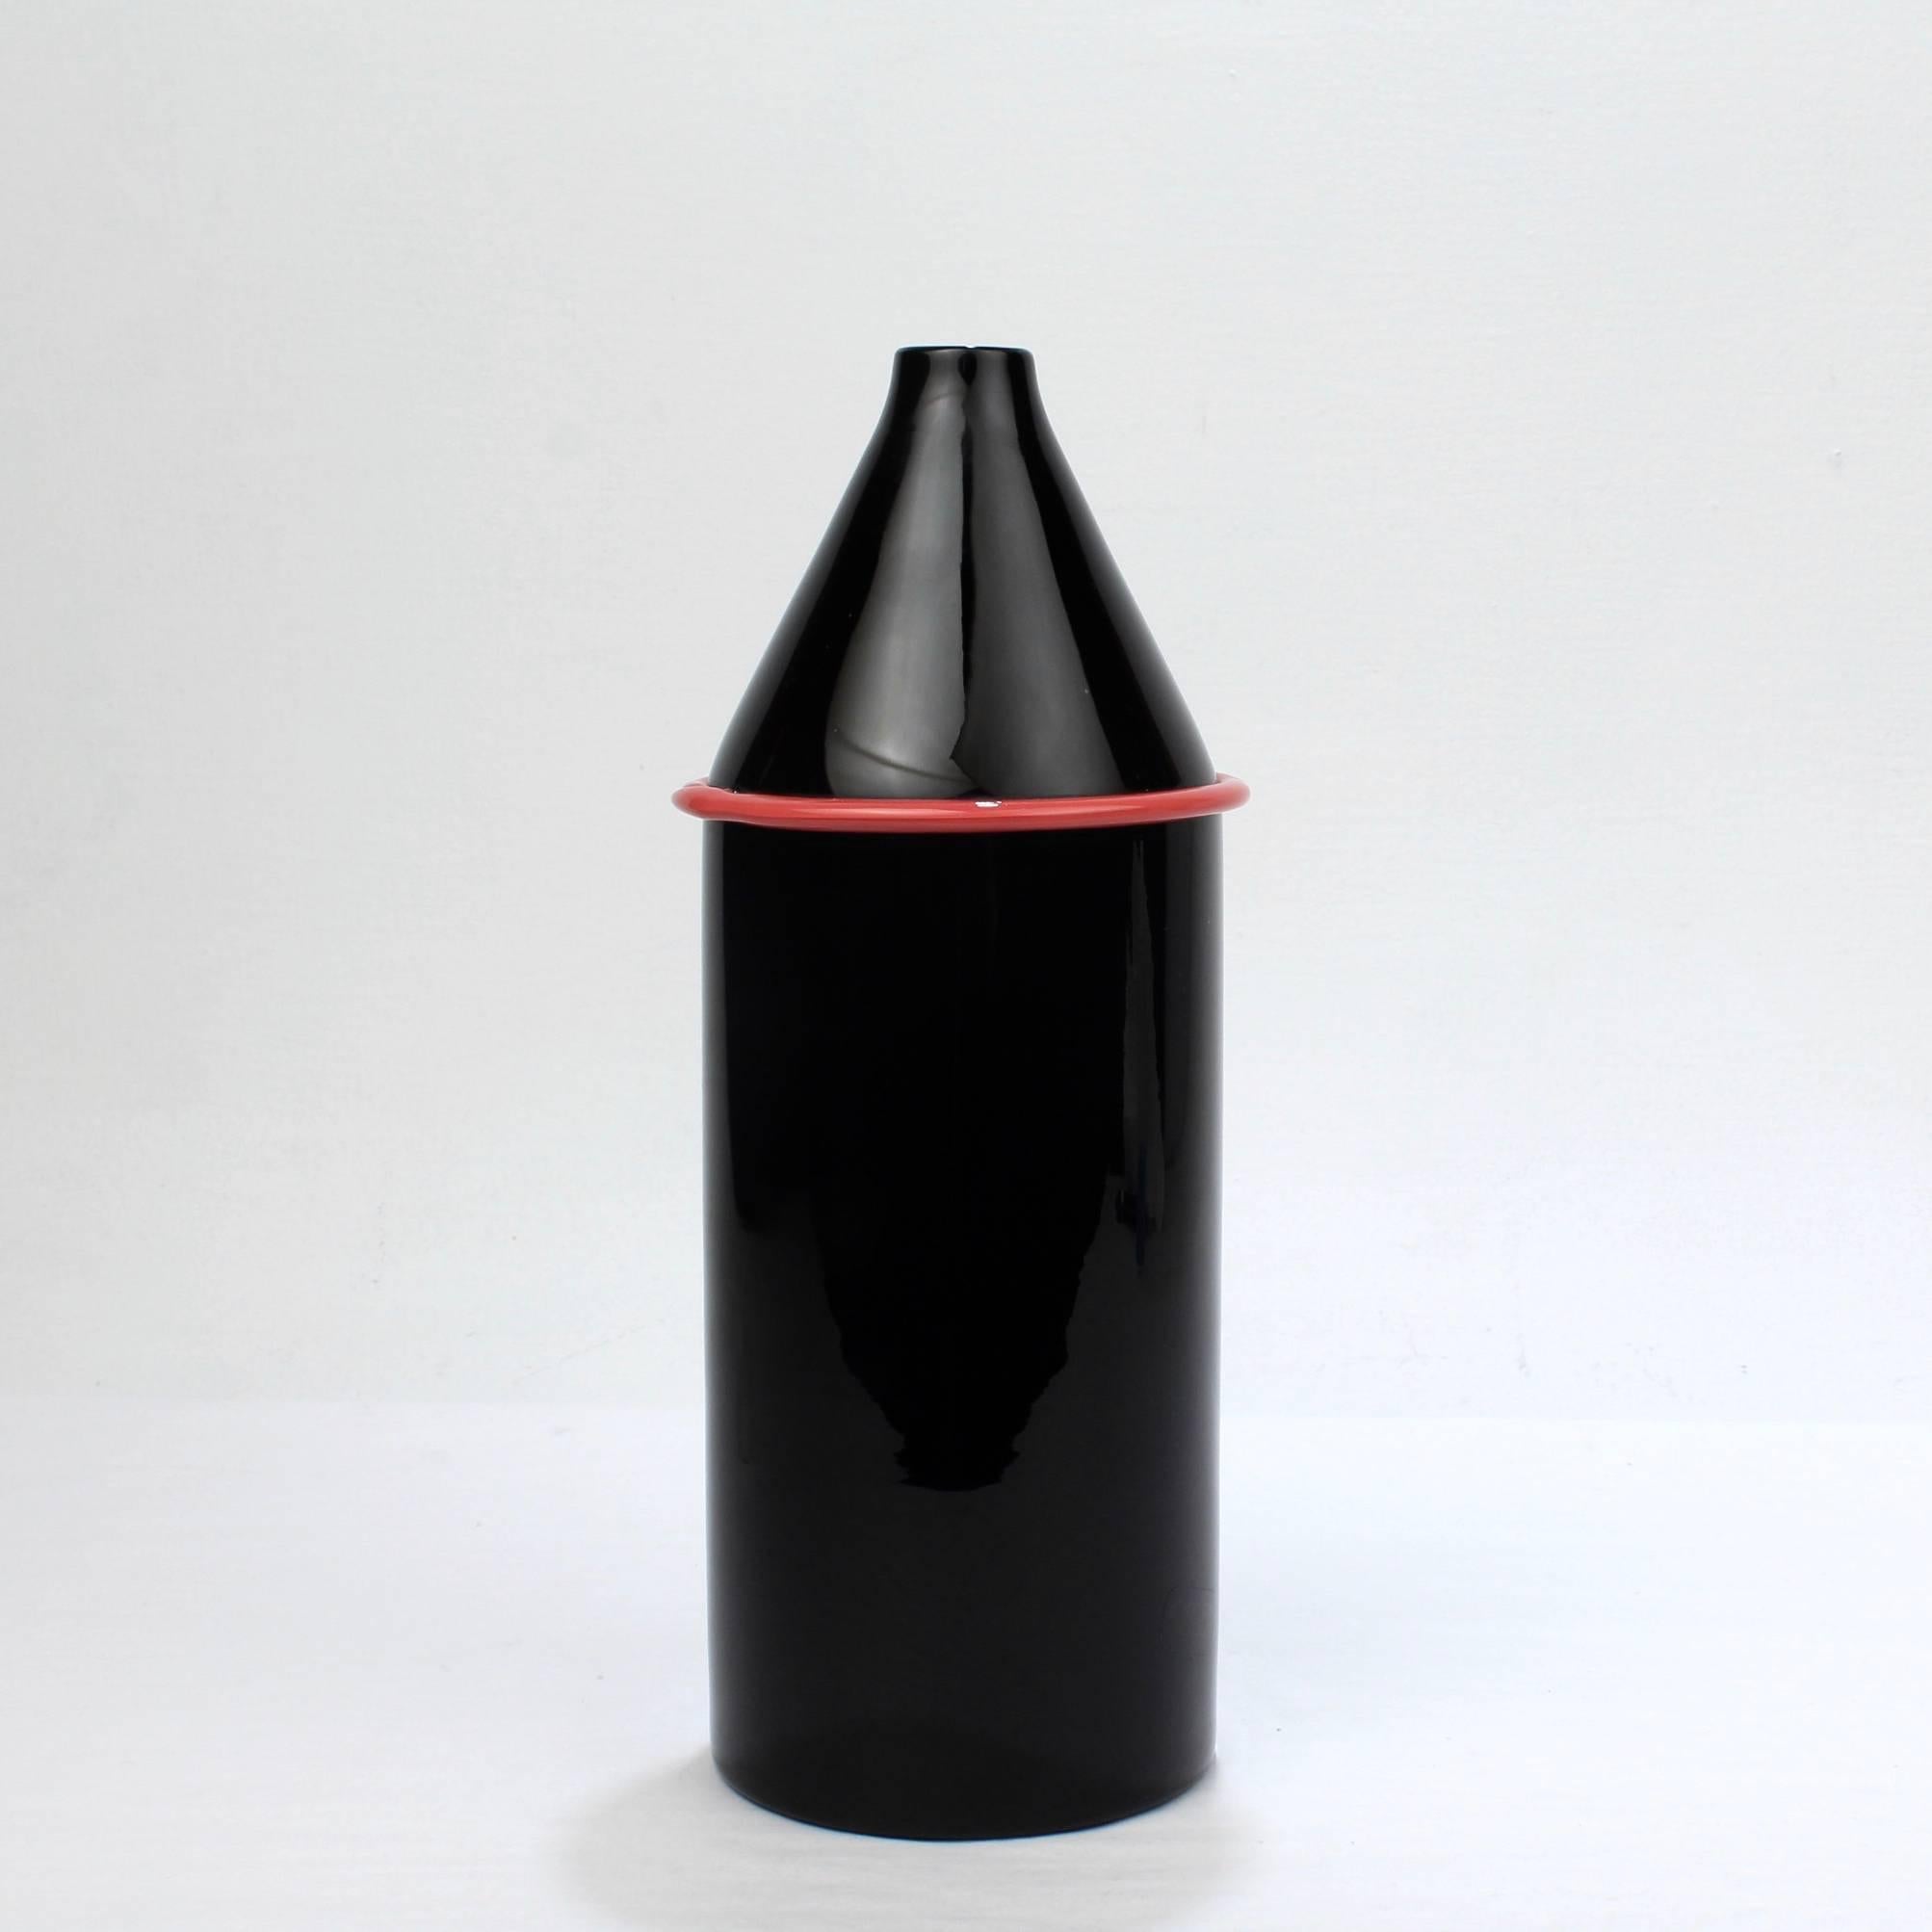 A very good Murano glass vase by Lino Tagliapietra and Marina Angelin with Effetre International for Oggetti.

A black bottle form vase with an applied red band.

A fine work from a one of masters of 20th century glass.

Base reads: